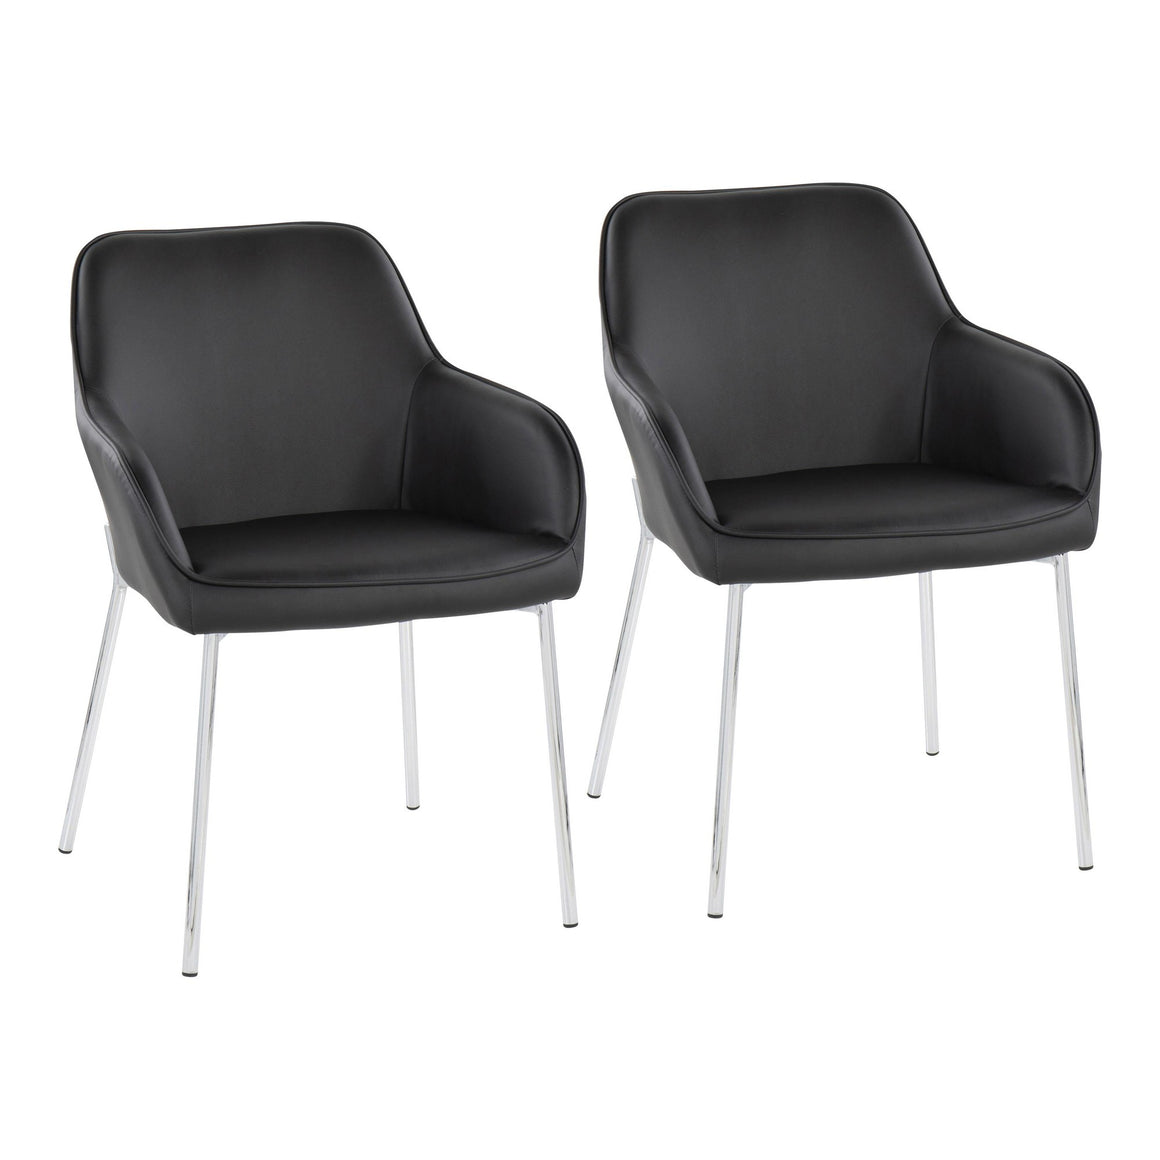 Daniella Contemporary Dining Chair in Chrome Steel and Black Faux Leather by LumiSource - Set of 2